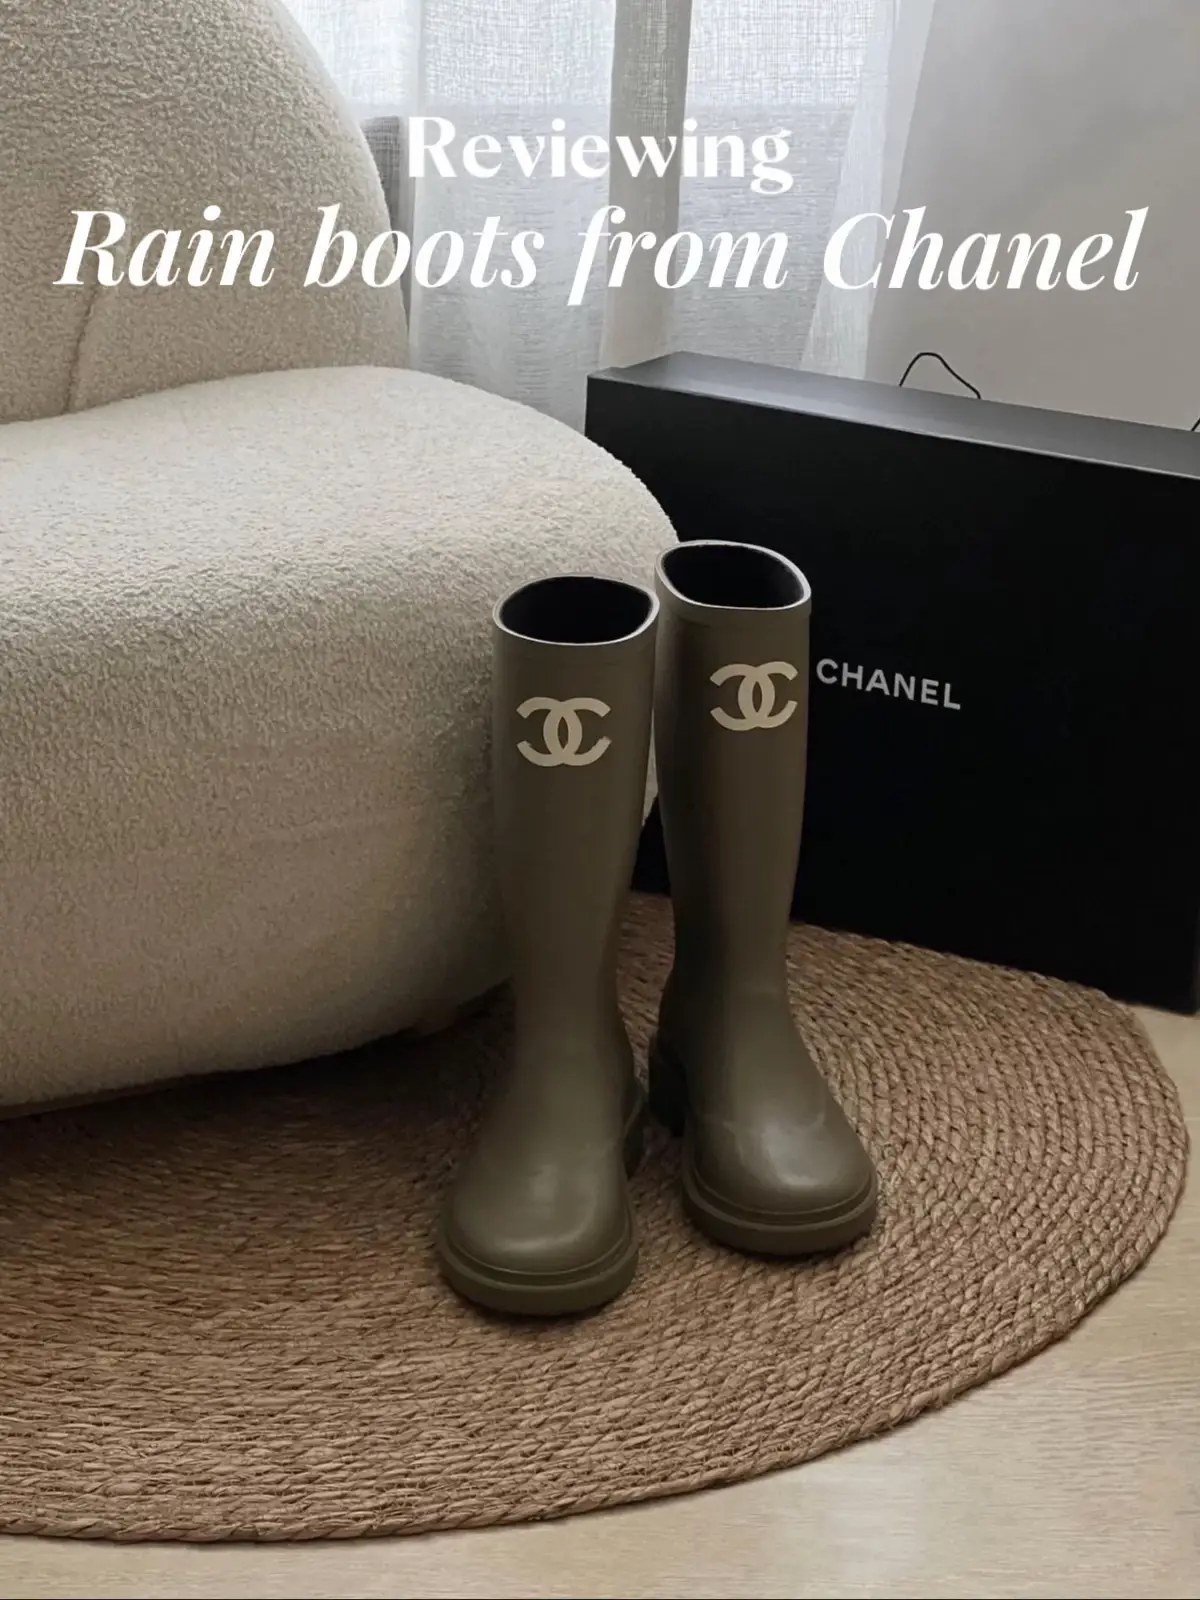 Reviewing Rain Boots from Chanel, Gallery posted by Ashy Patterson